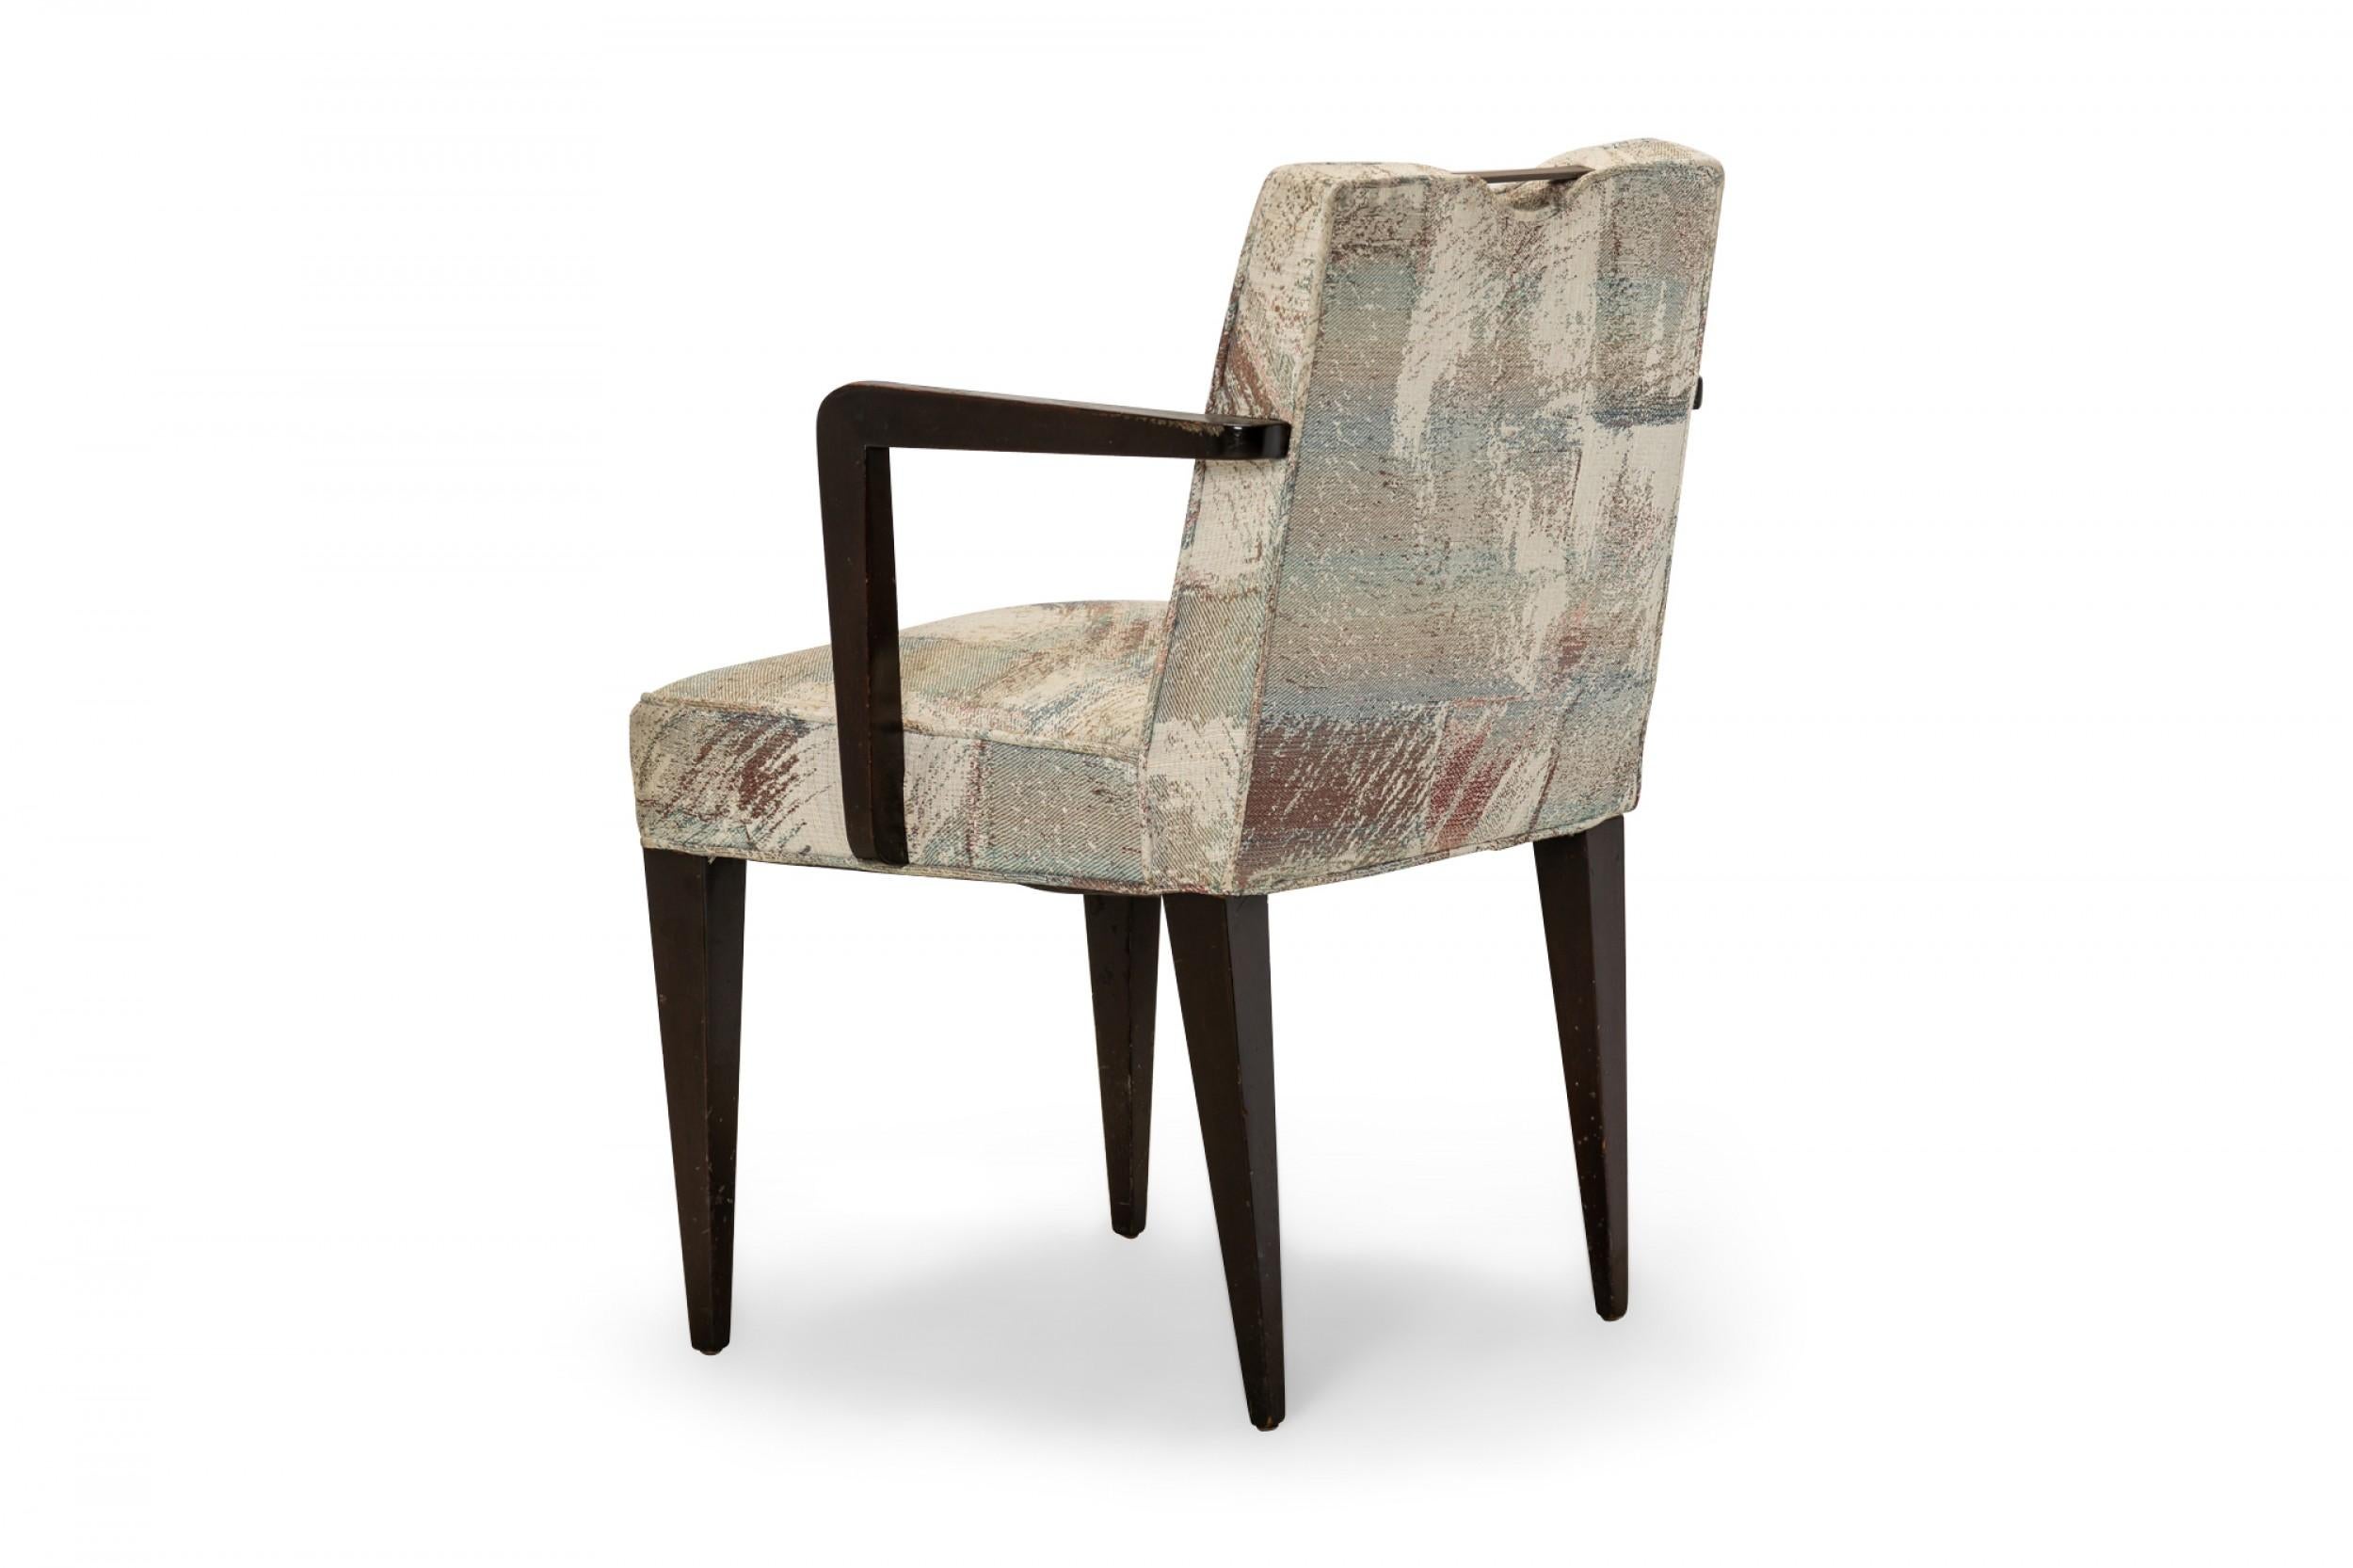 patterned upholstered dining chair